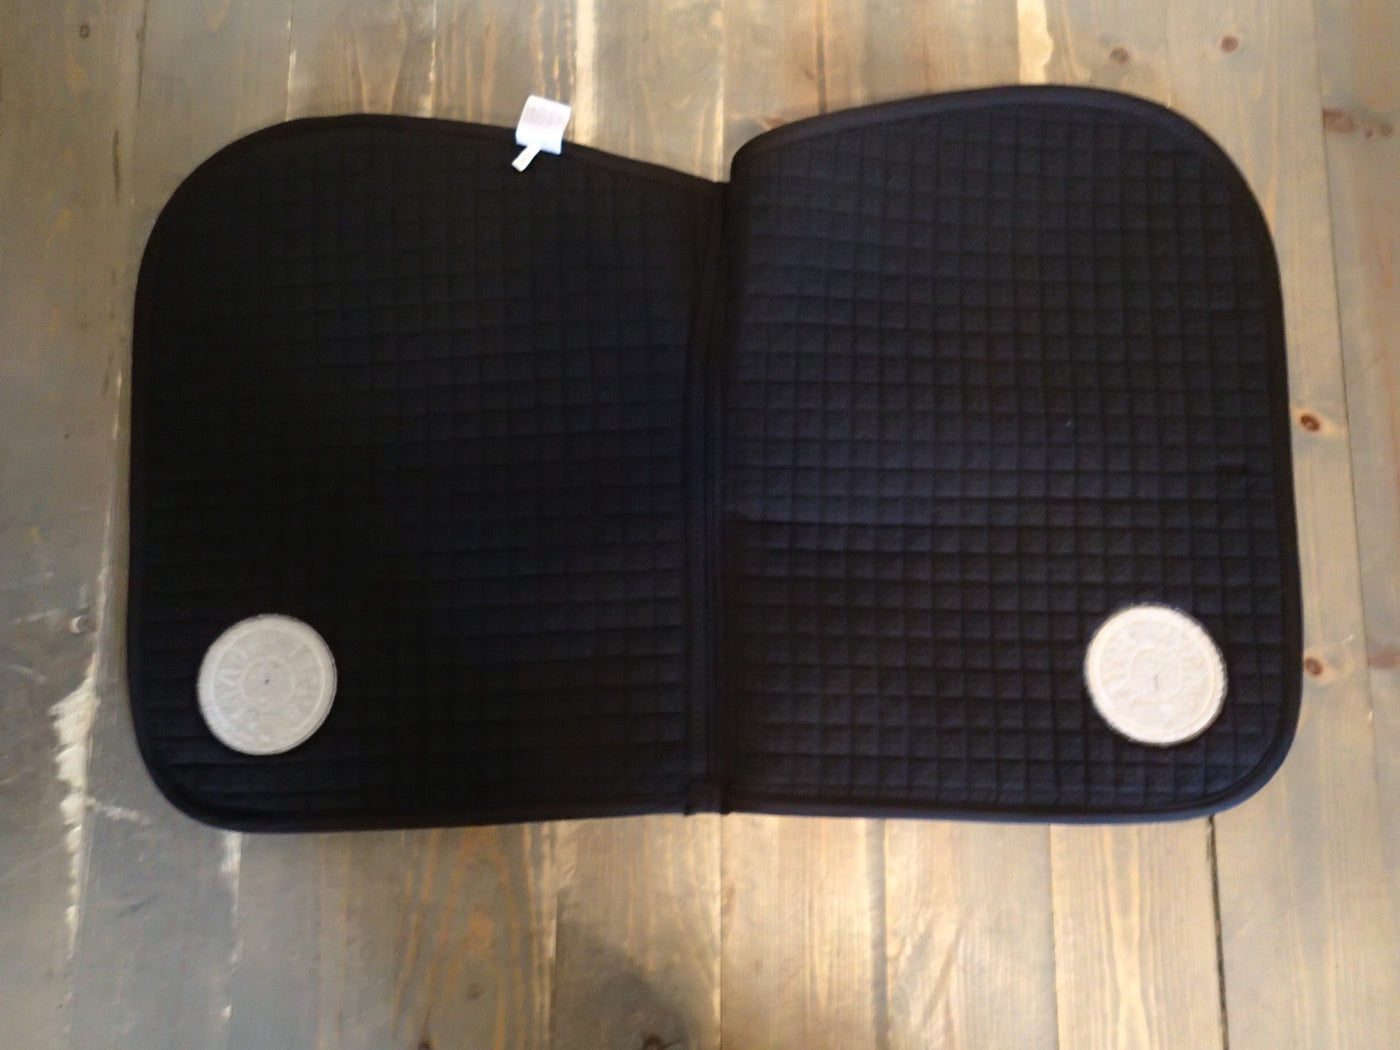 Butet Quilted Saddle Pad - NEW